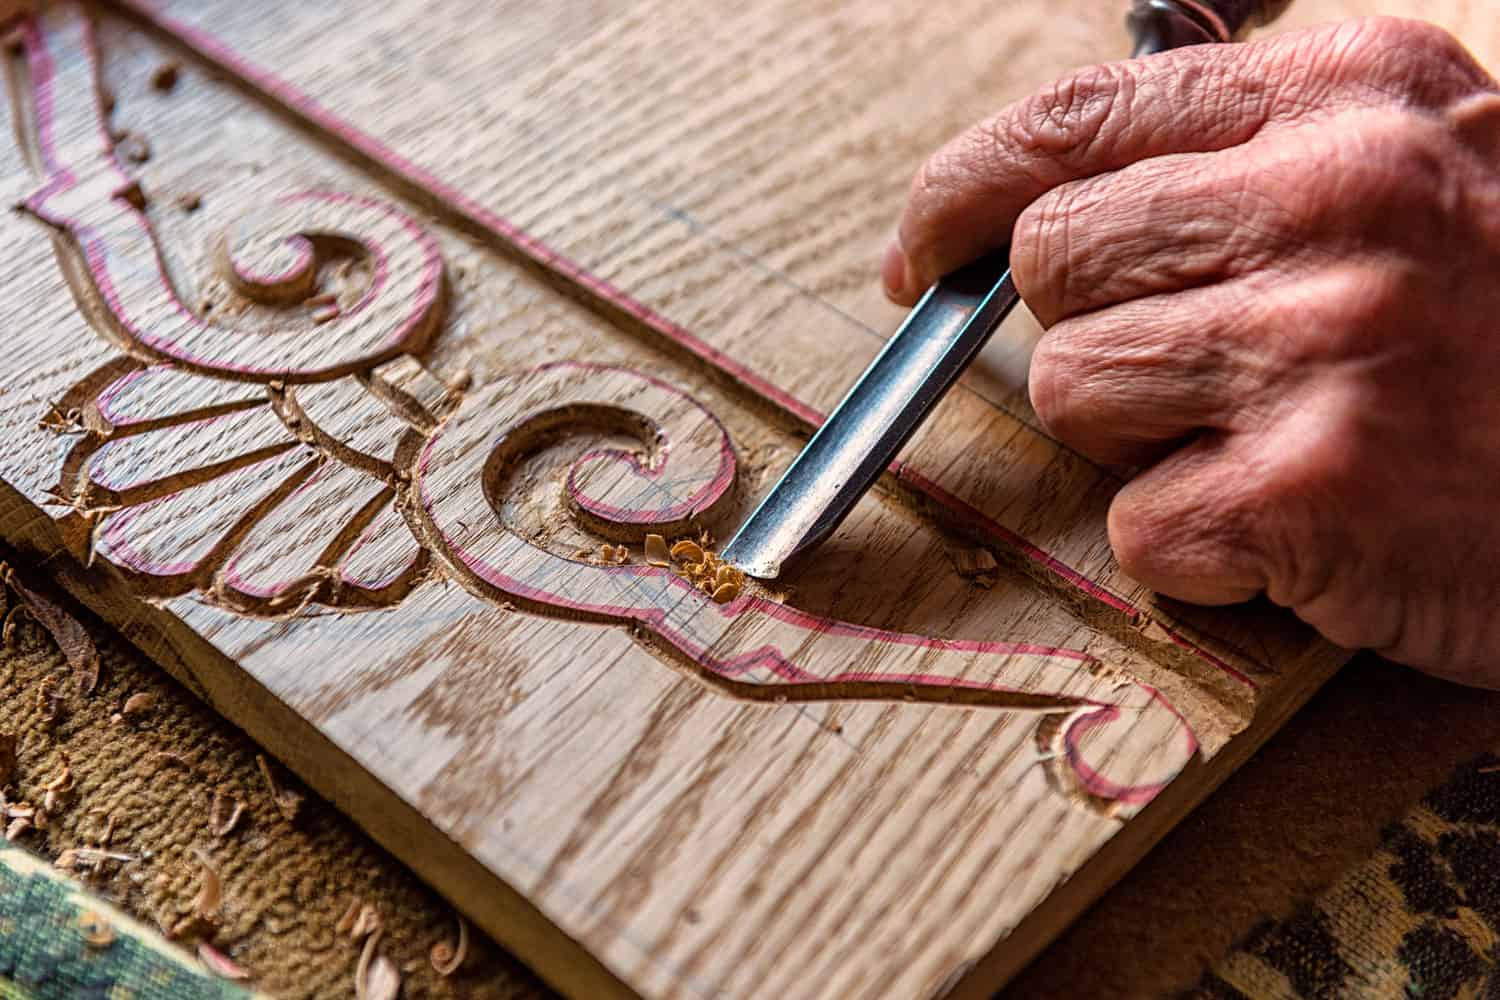 A elderly man doing wood carving work using a chisel